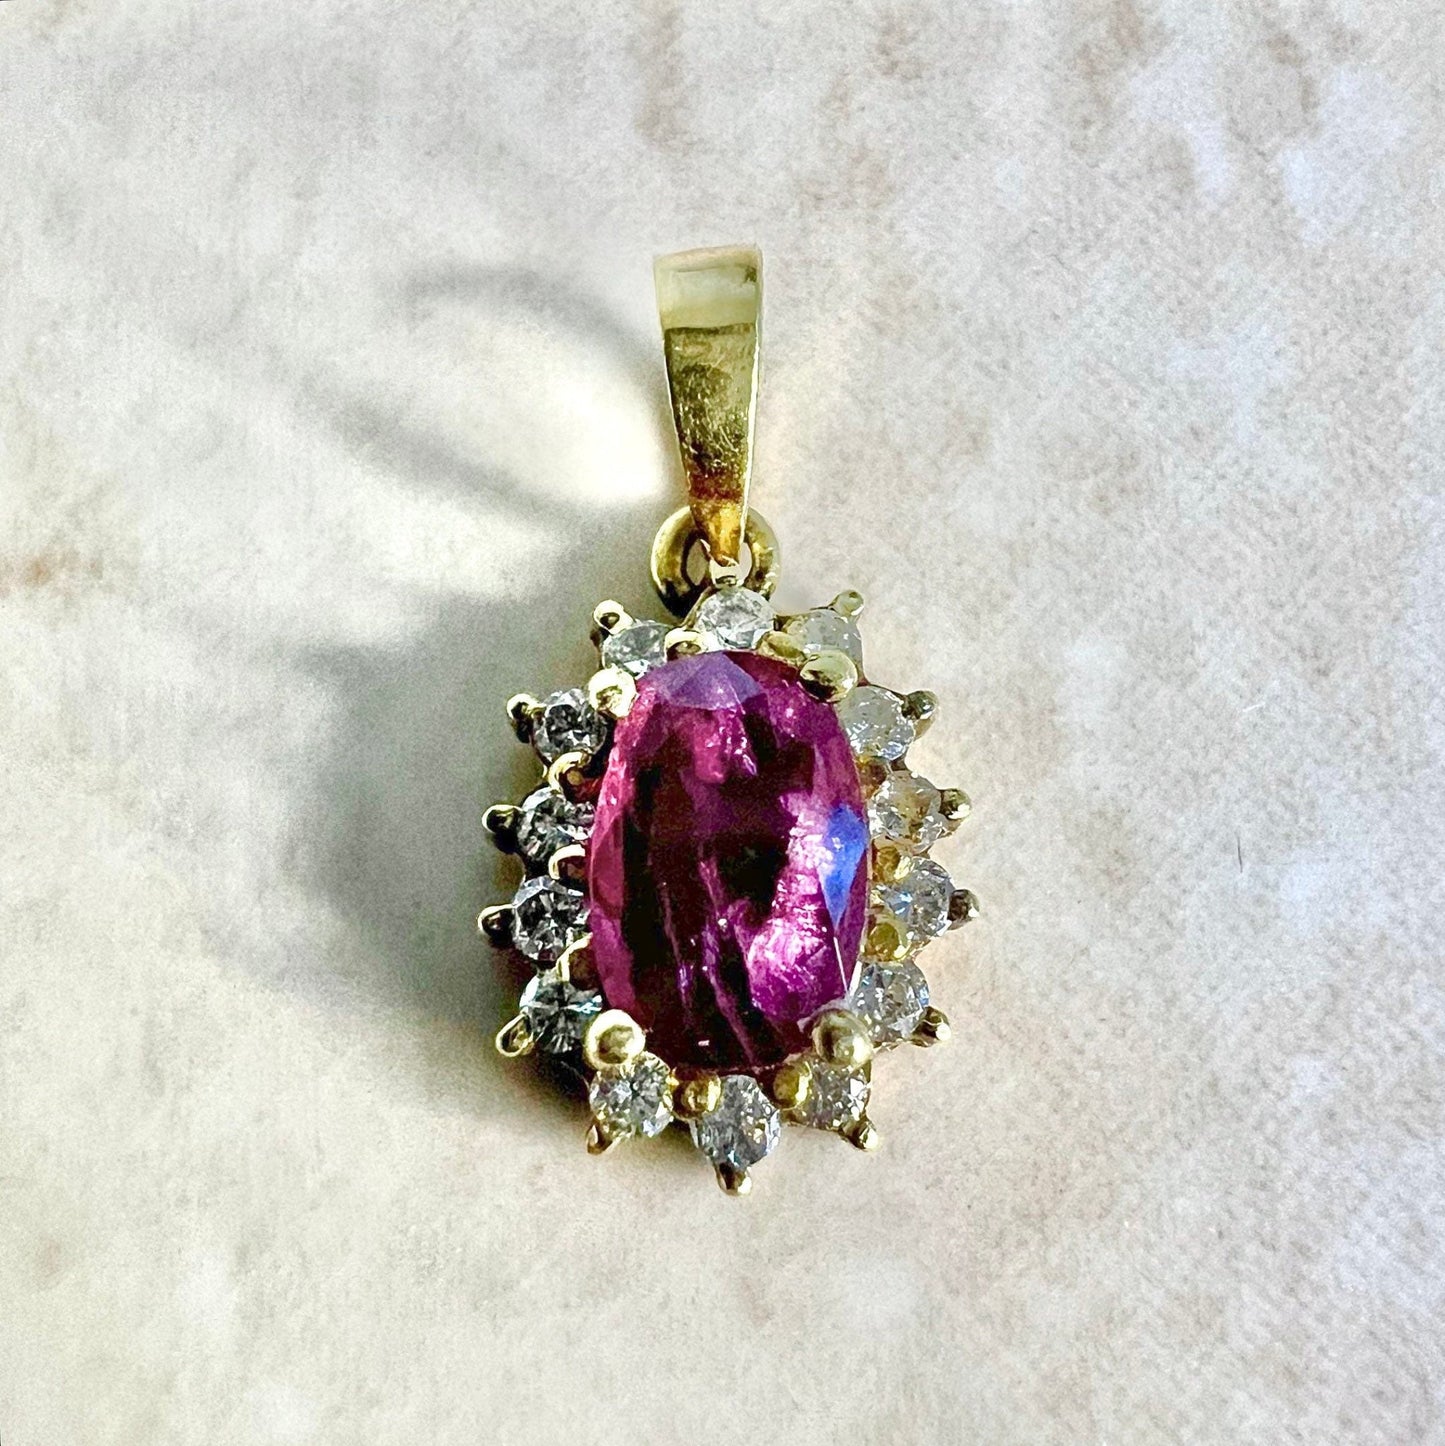 Vintage 14K Ruby & Diamond Halo Pendant Necklace - Yellow Gold Ruby Pendant - July Birthstone - Ruby Necklace - Birthday Gifts For Her